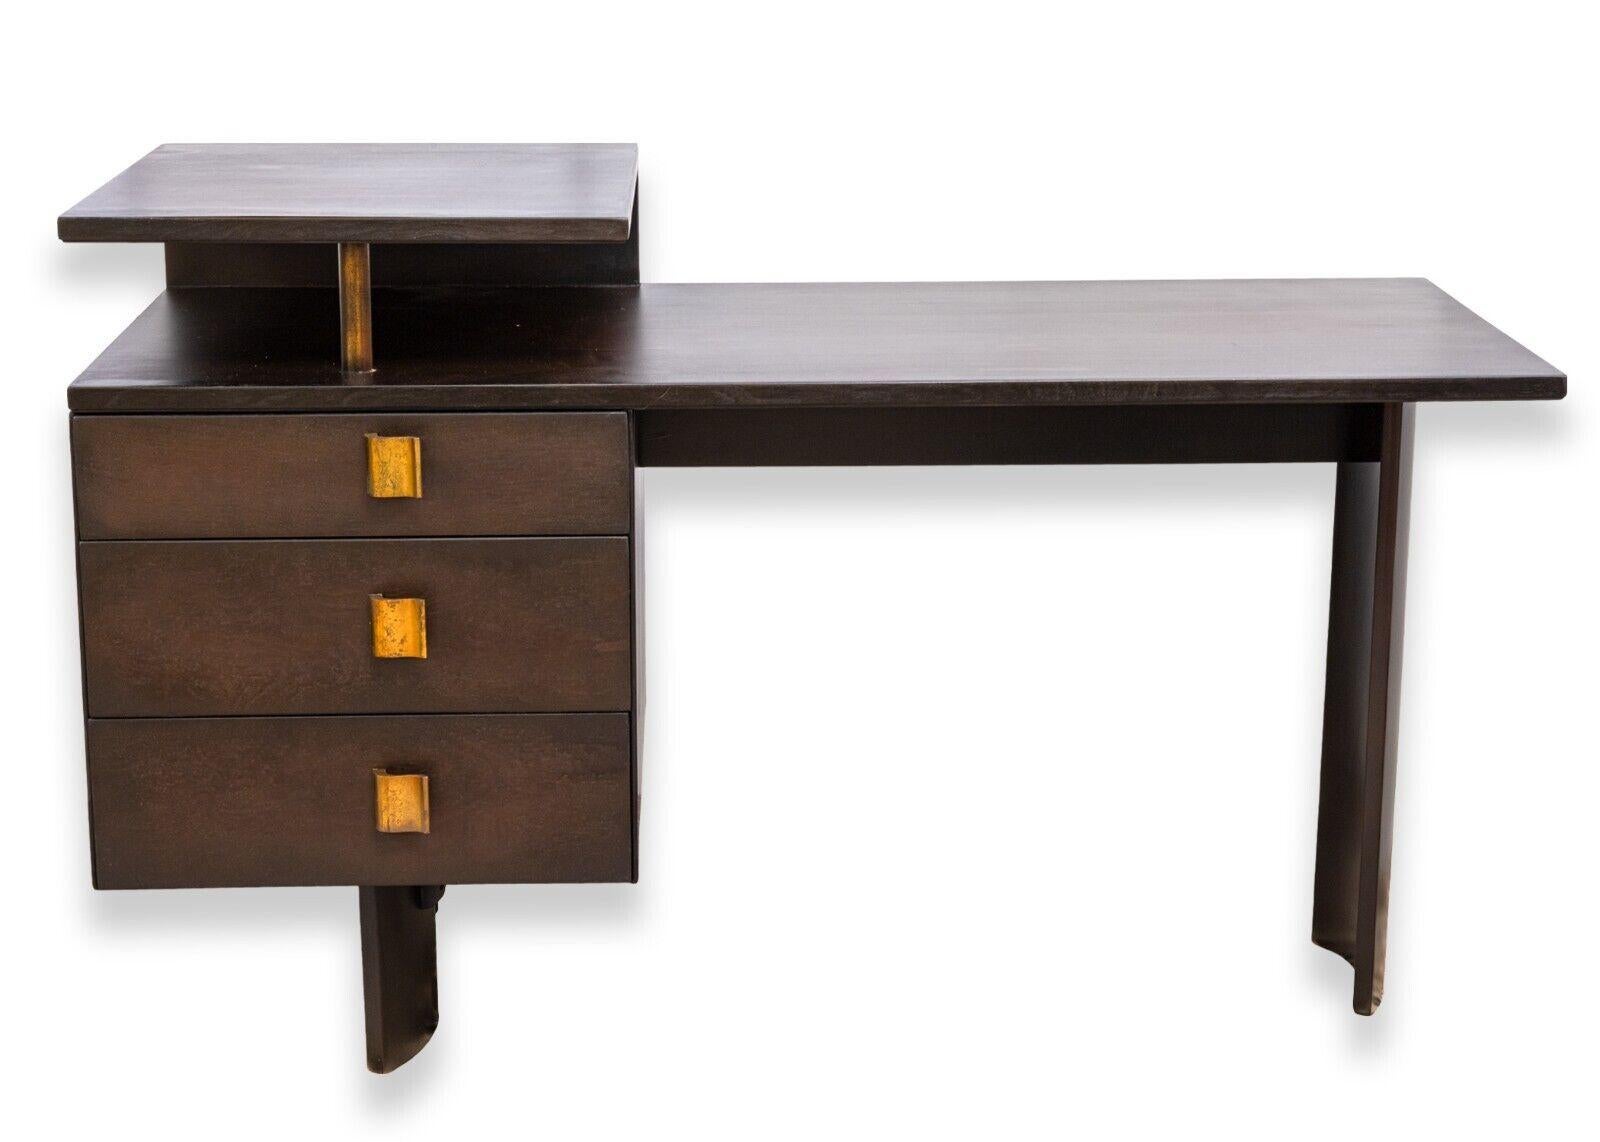 A vintage Eliel Saarinen for Johnson typing desk. This is a beautiful, rare vintage desk from an amazing designer. This desk, circa 1948, features a wonderful mid century design featuring S-shaped handles and legs, and a raised side desk top. This